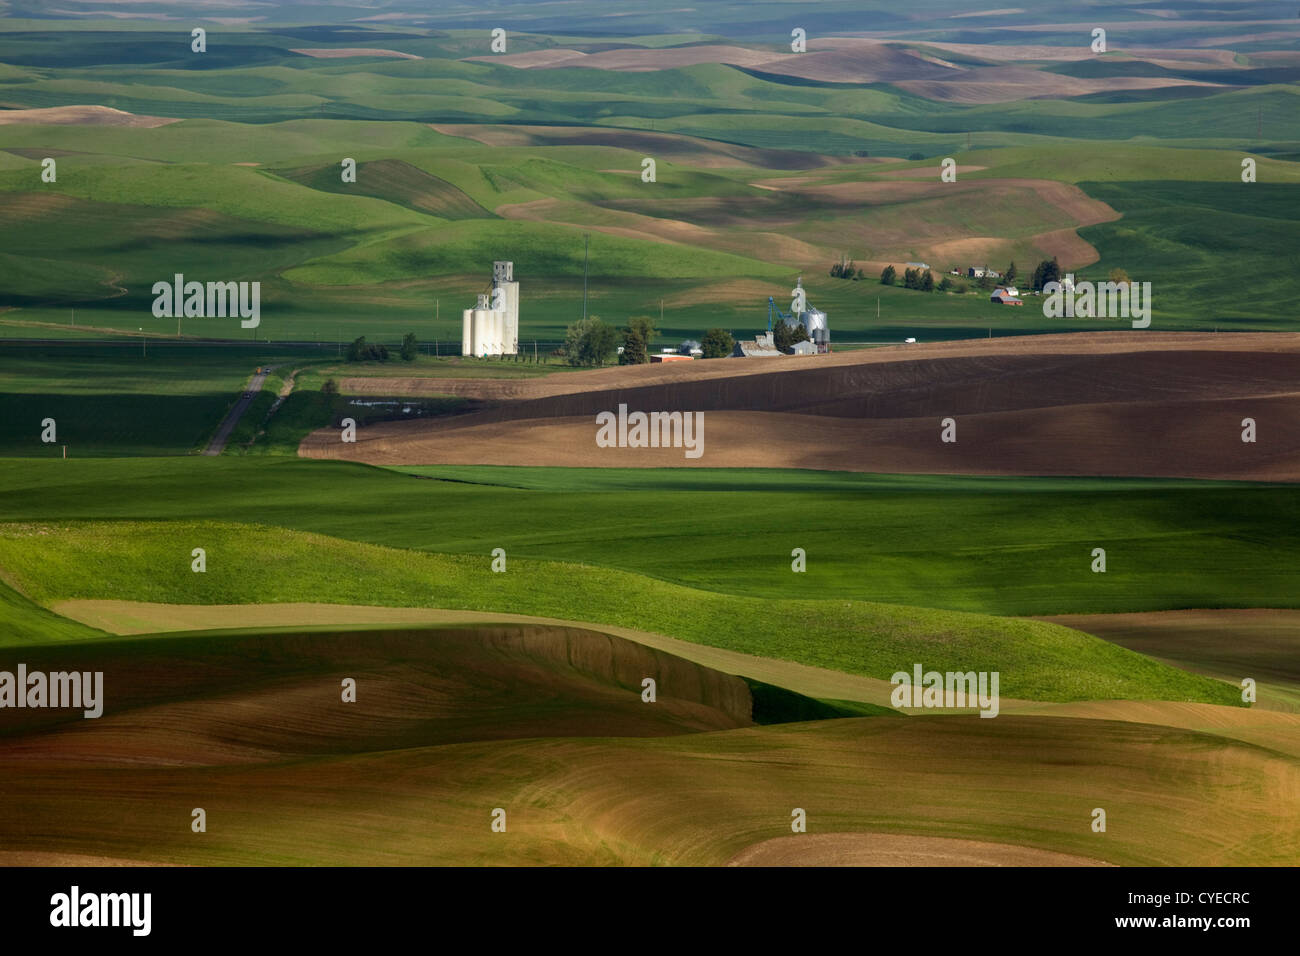 WA05492-00...WASHINGTON - View over the farm covered rolling hills of the Palouse from Steptoe Butte State Park. Stock Photo